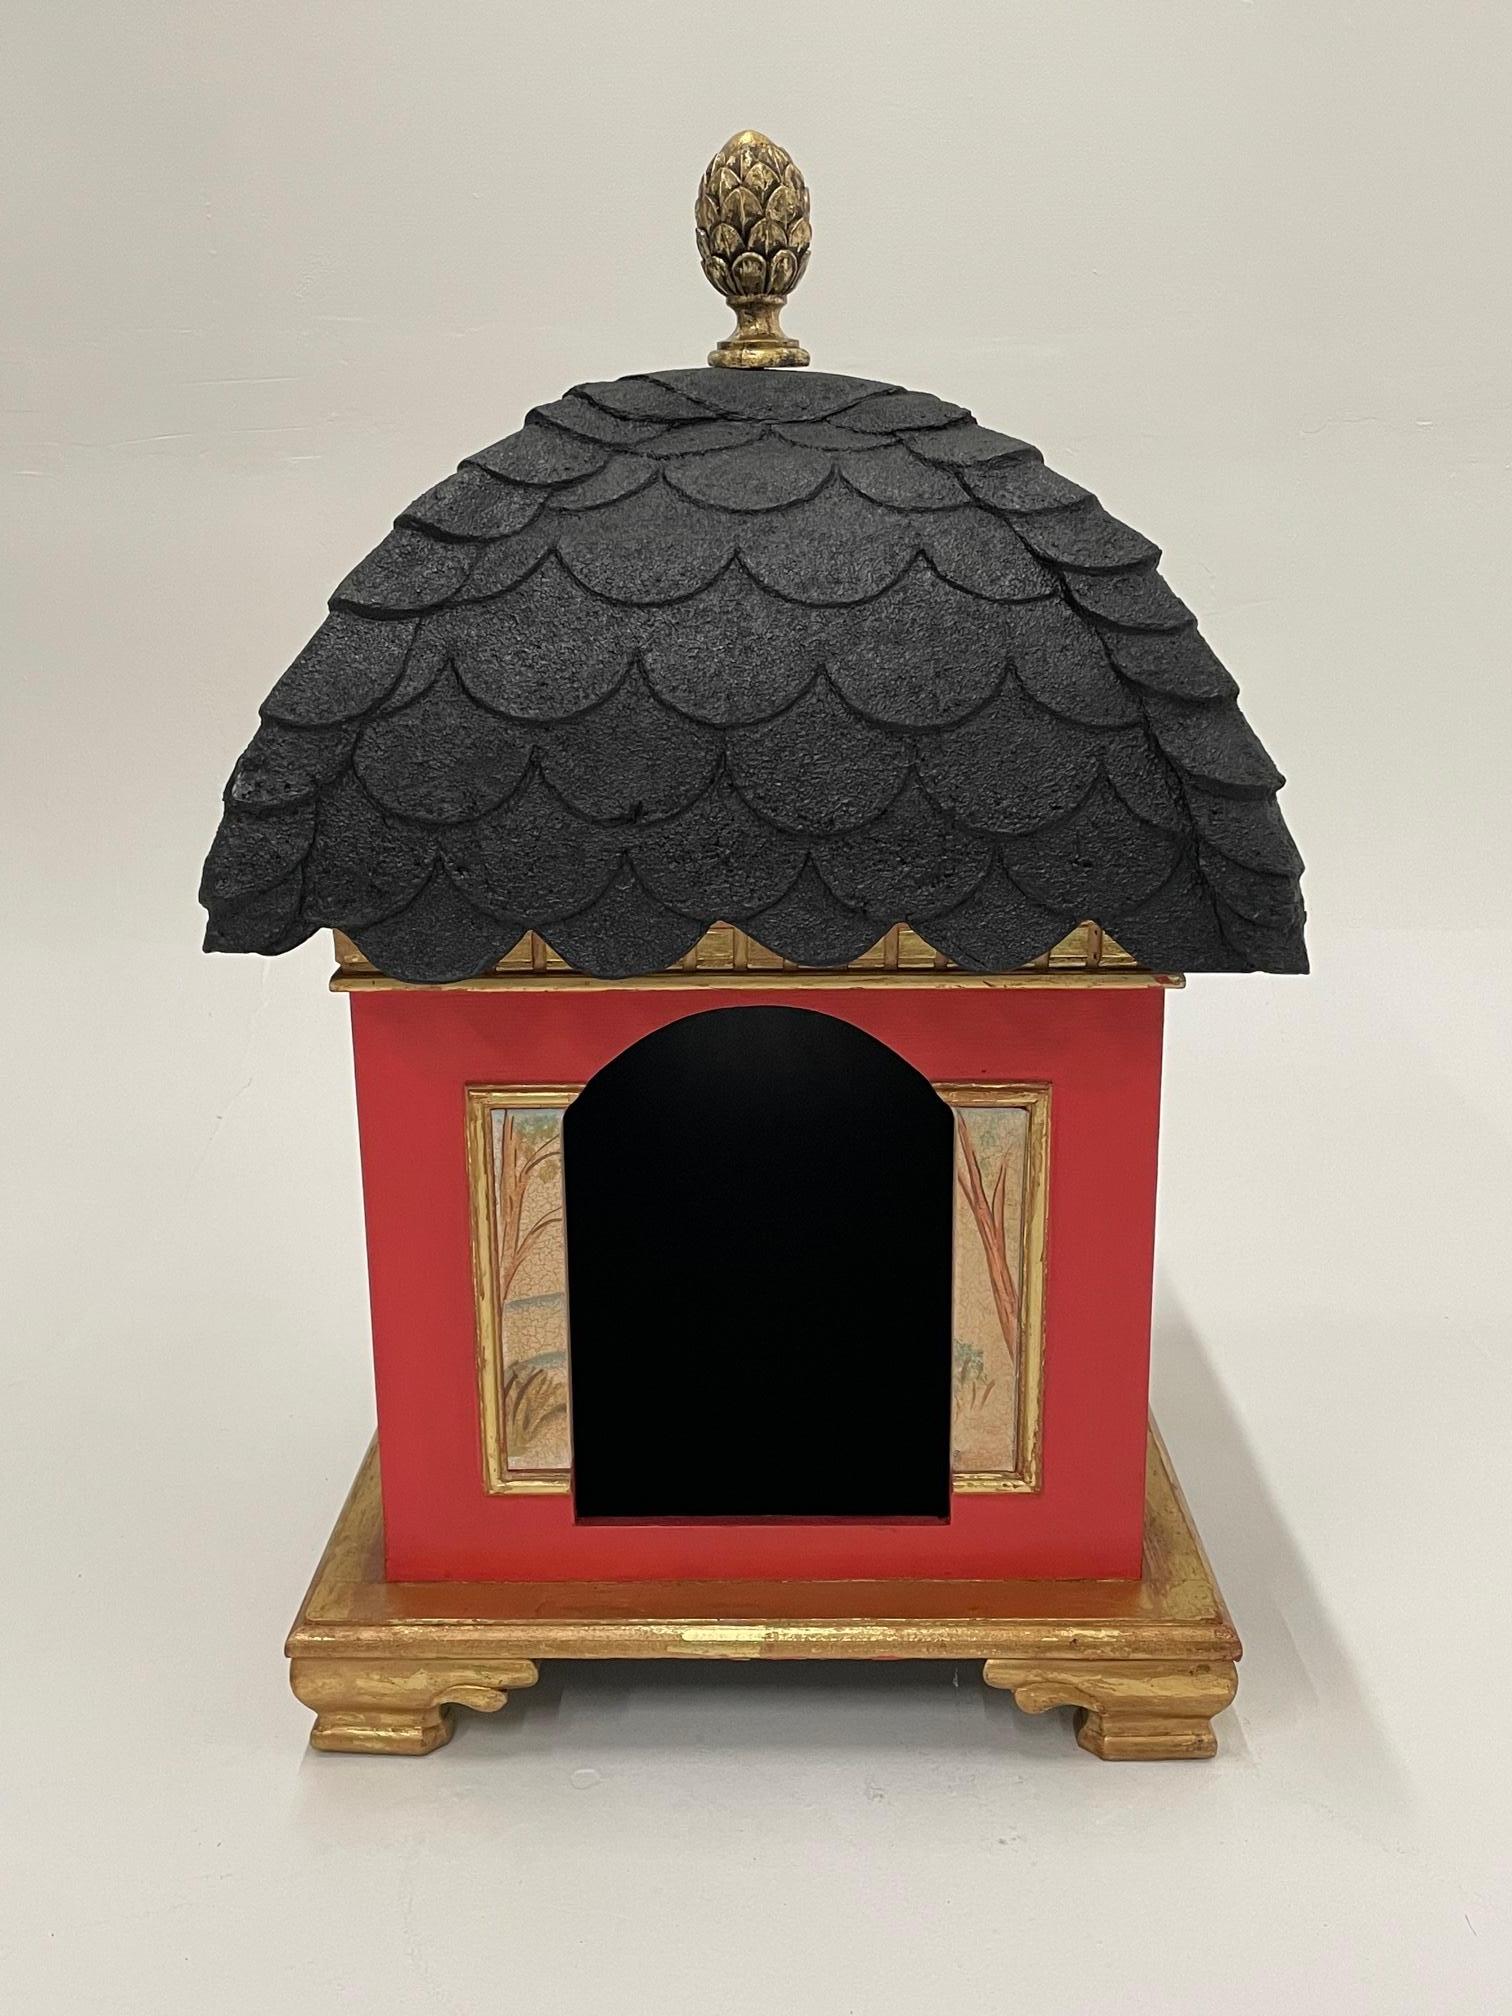 For the dog who has everything, an over the top Hollywood Regency style doghouse in red, black and gold. Lovely pastural scenes are painted on the sides.
Opening for lucky puppy; 13 H x 9 W.
 